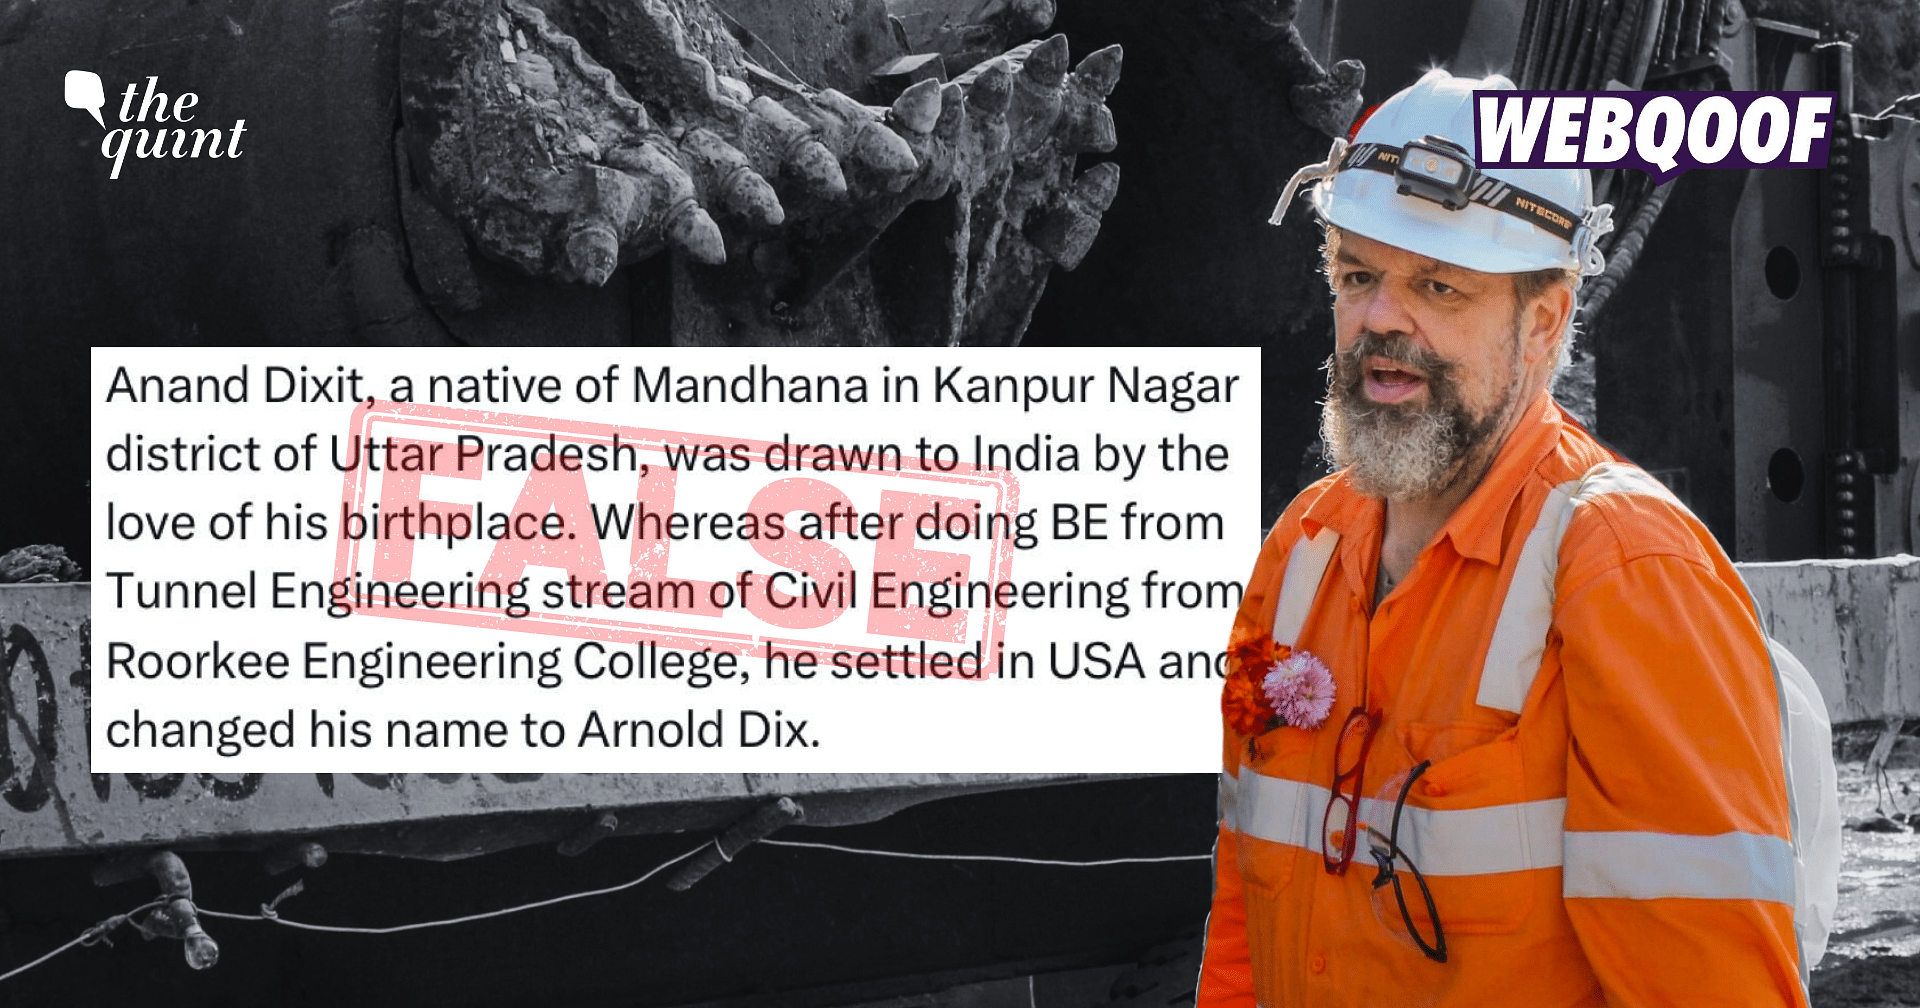 Fact-Check: Silkyara Tunnel Expert Arnold Dix Is Not ‘Anand Dixit From Kanpur'